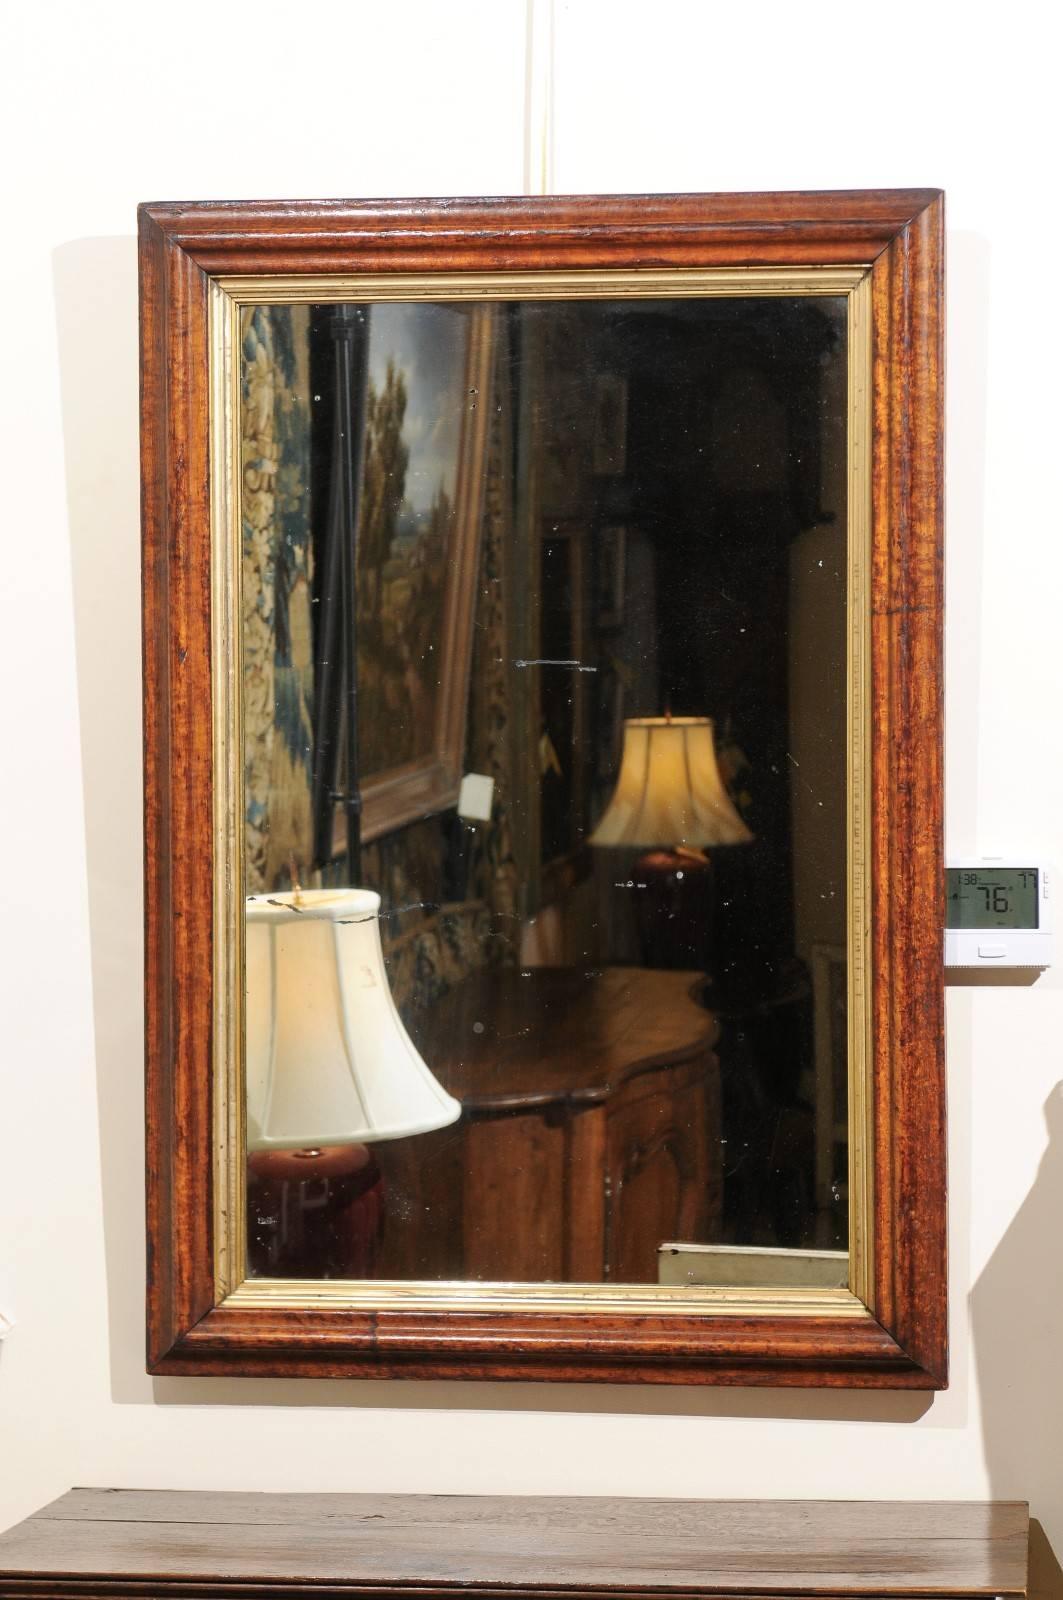 Large rectangular neoclassical style mirror in bird's-eye sycamore and parcel-gilt frame, Italy 19th century. Frame can be oriented vertically or horizontally.